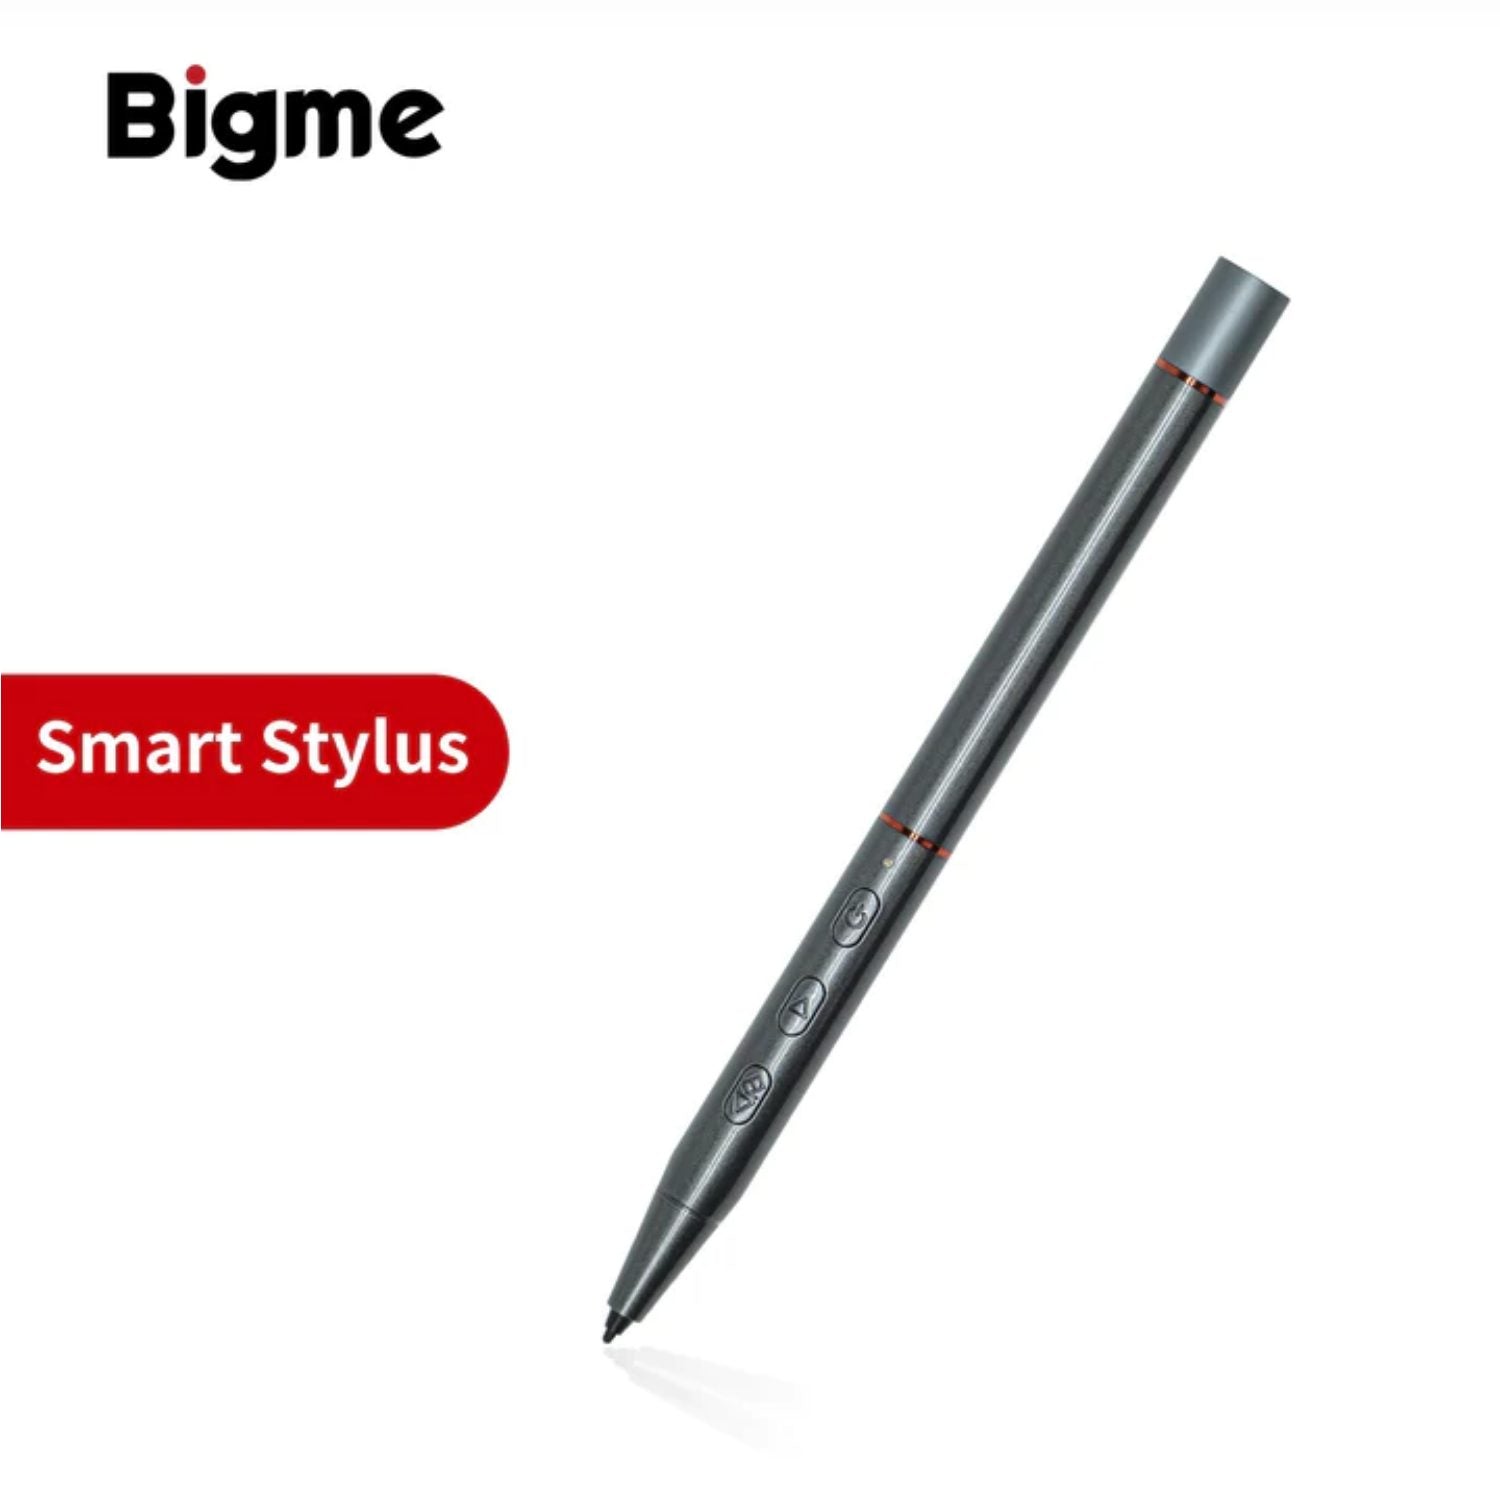 Bigme replacement stylus for Bigme Inknote Color+ and Bigme Galy